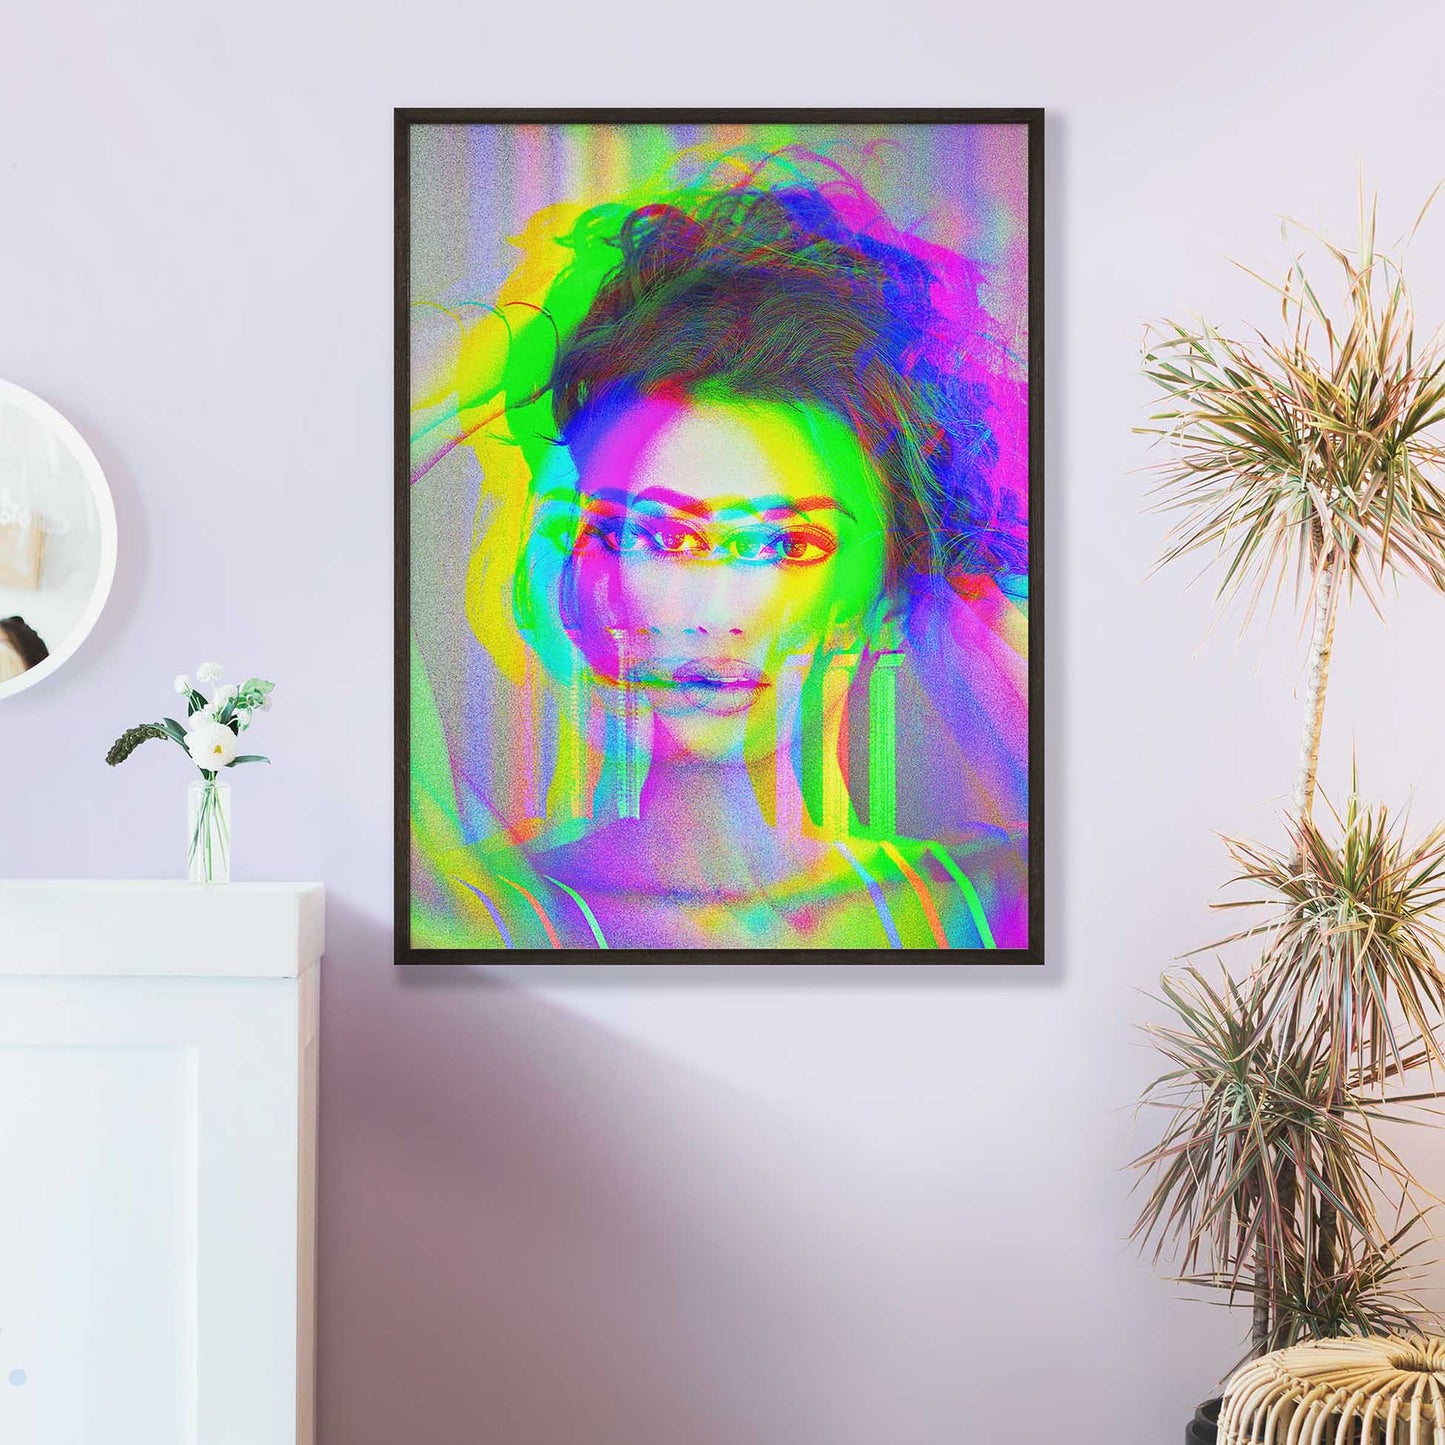 Embrace the Future of Art: Stay ahead of the curve and embrace the future of art with this innovative anaglyph 3D print. Its cool and contemporary design pushes boundaries, making it a statement piece that reflects your forward-thinking 